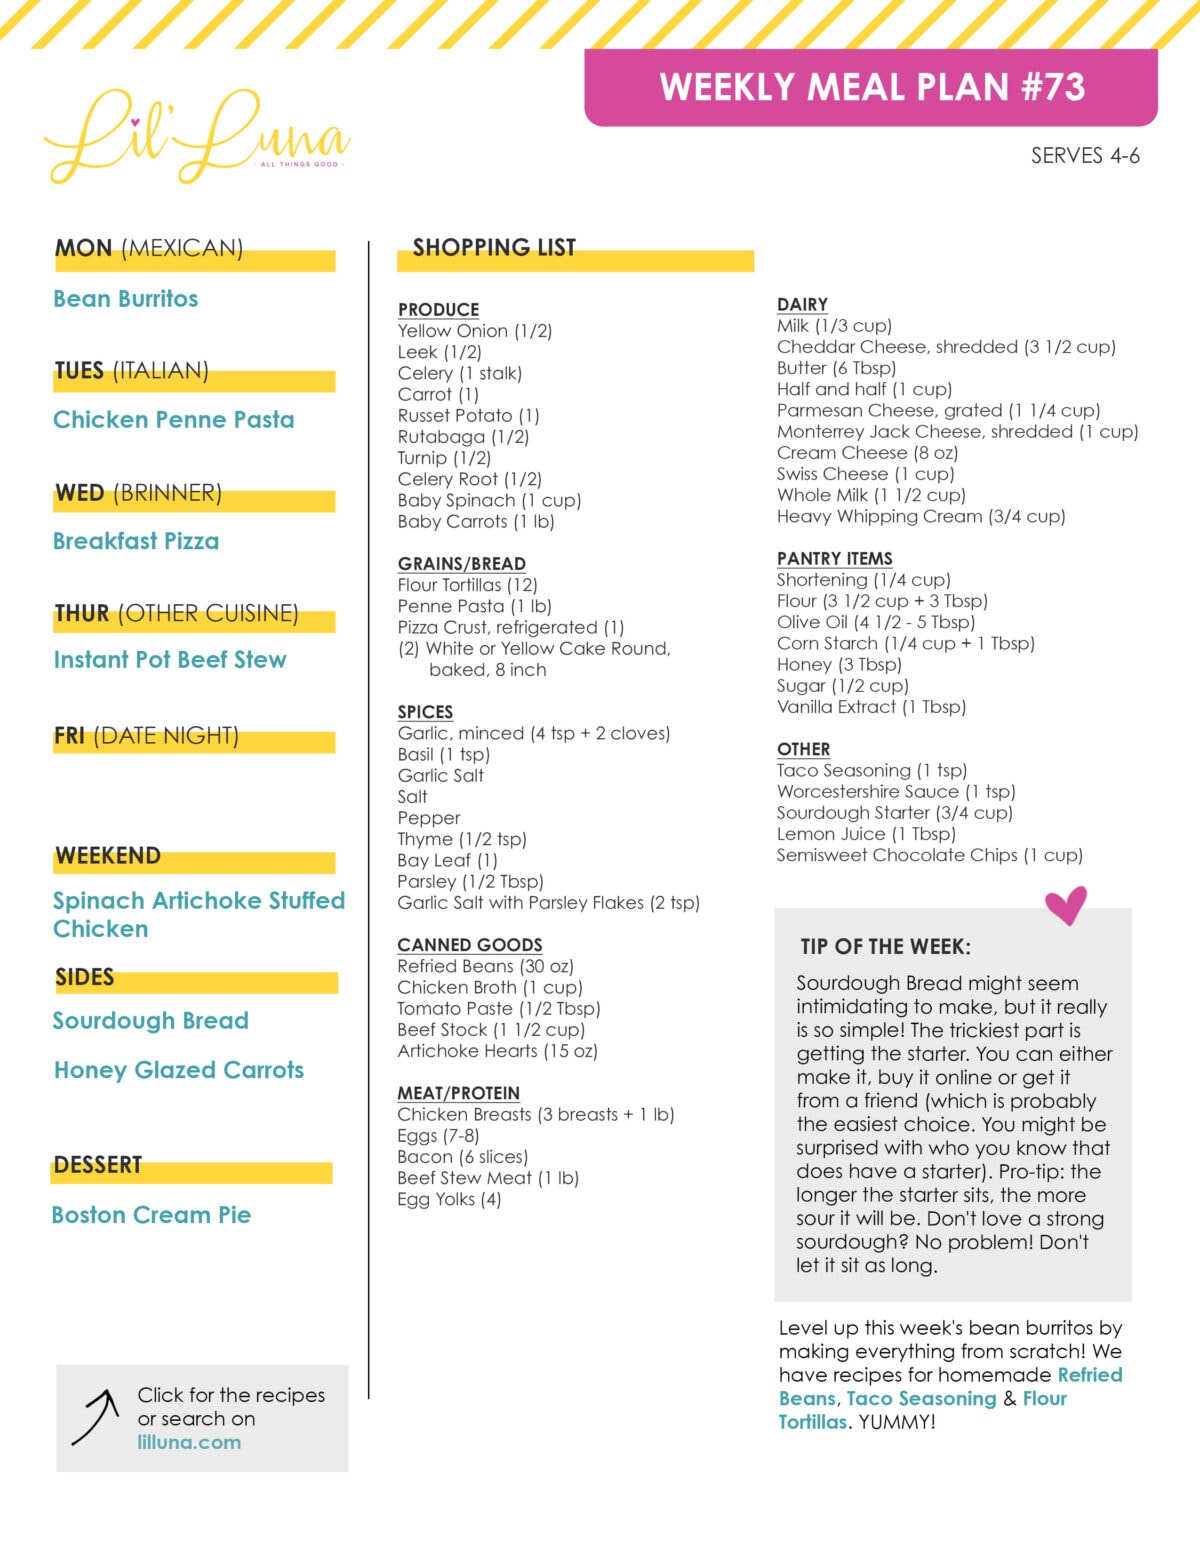 Printable version of Meal Plan #73 with grocery list.